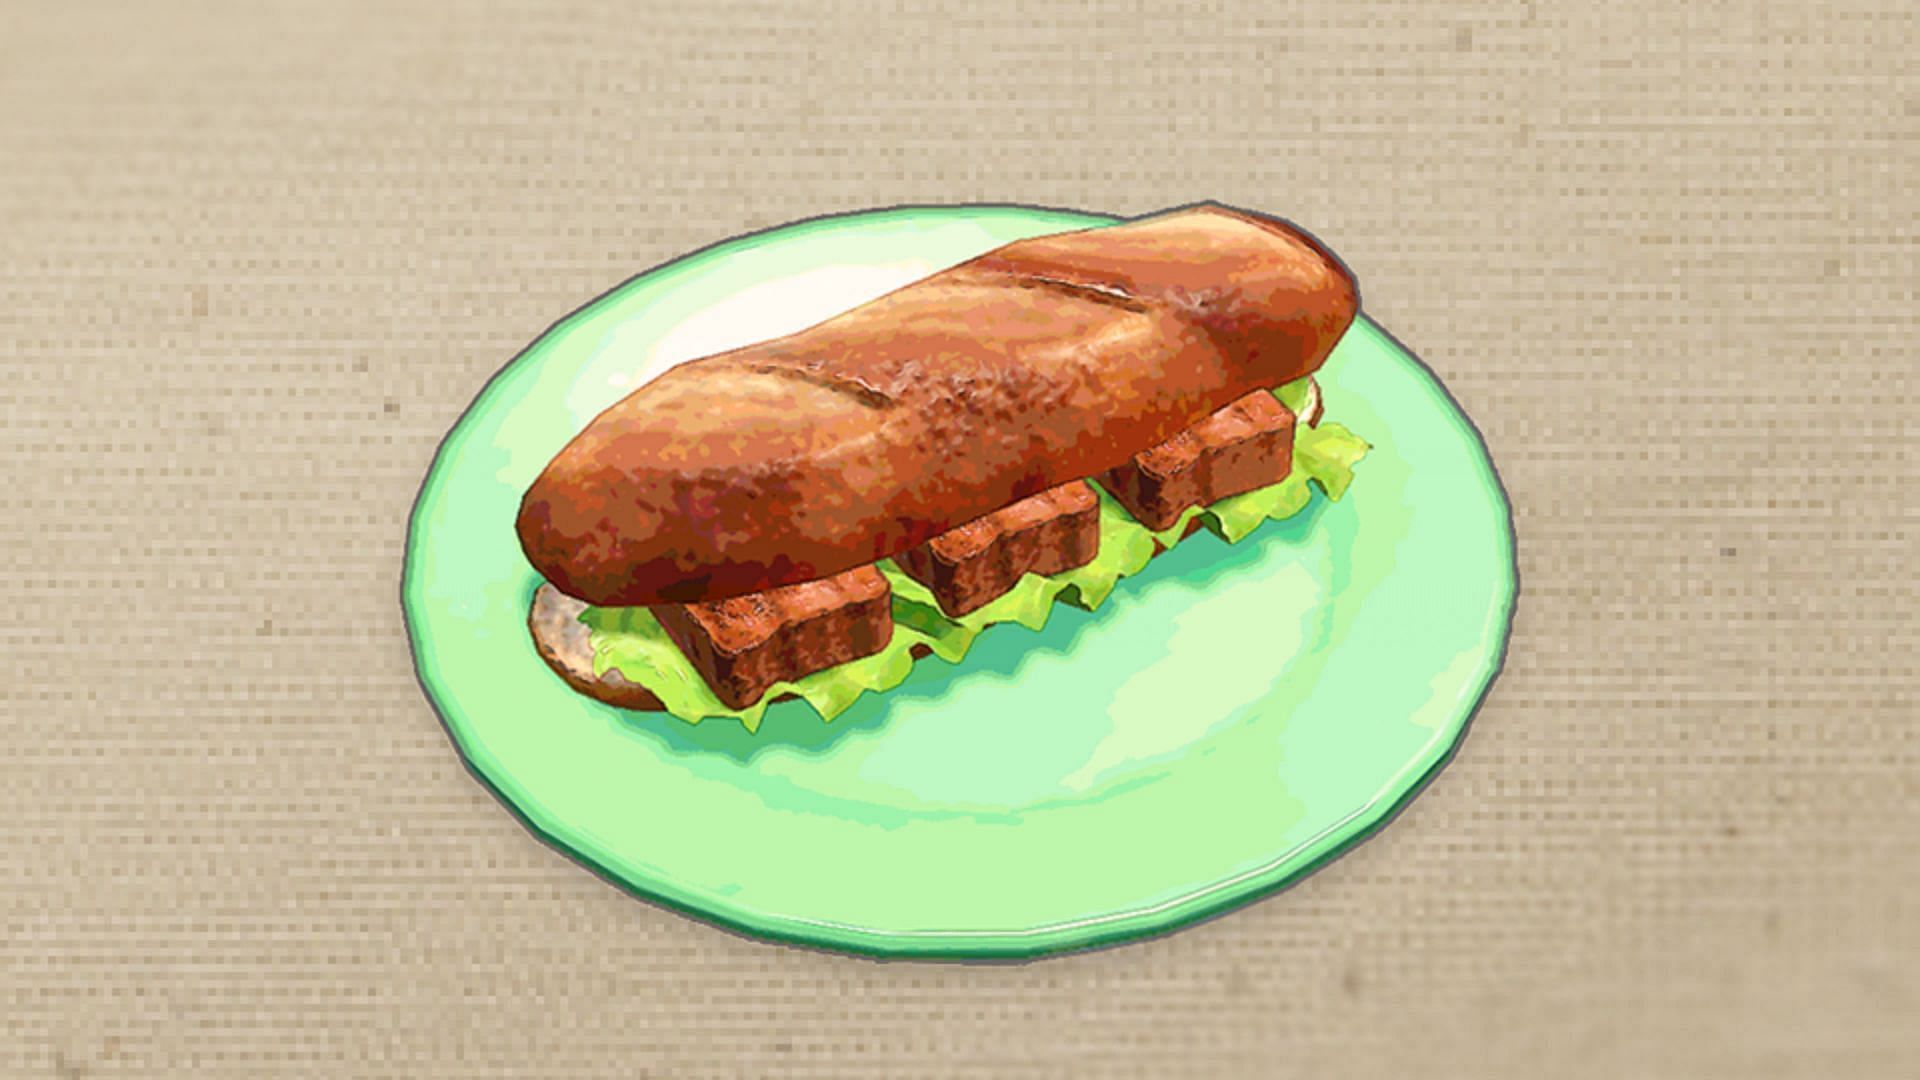 Pokemon Scarlet and Violet all Title power sandwiches in the game (Image via Nintendo)